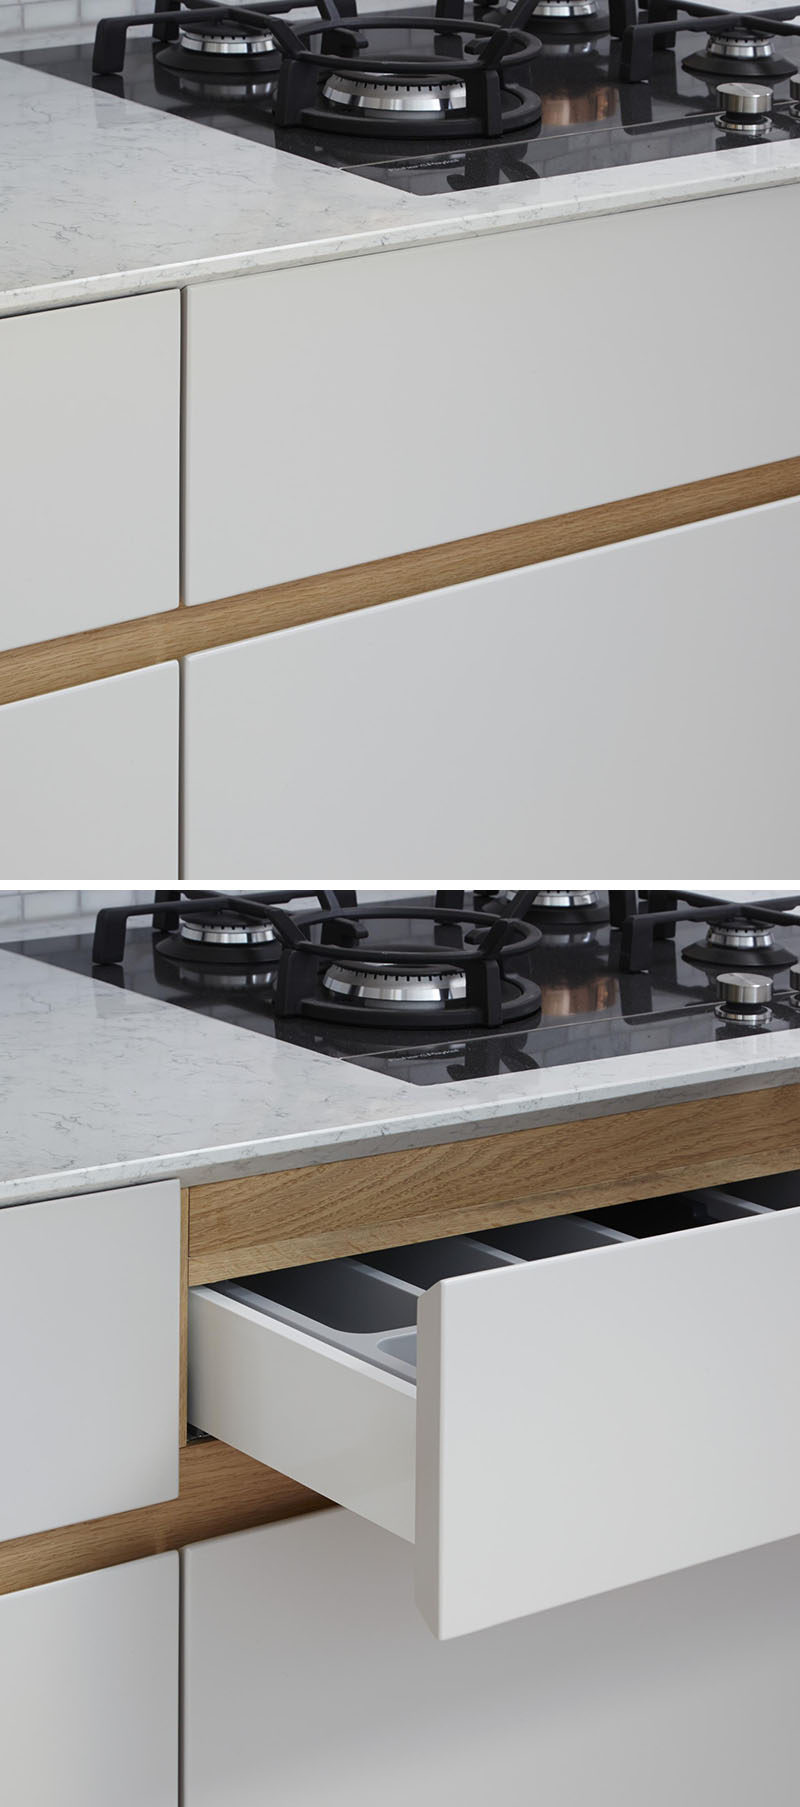 No Hardware For The Kitchen Cabinets In This London Home // This kitchen has white melamine cabinets with a recessed finger detail made from European oak, to make it easy to open the drawers and cabinets.